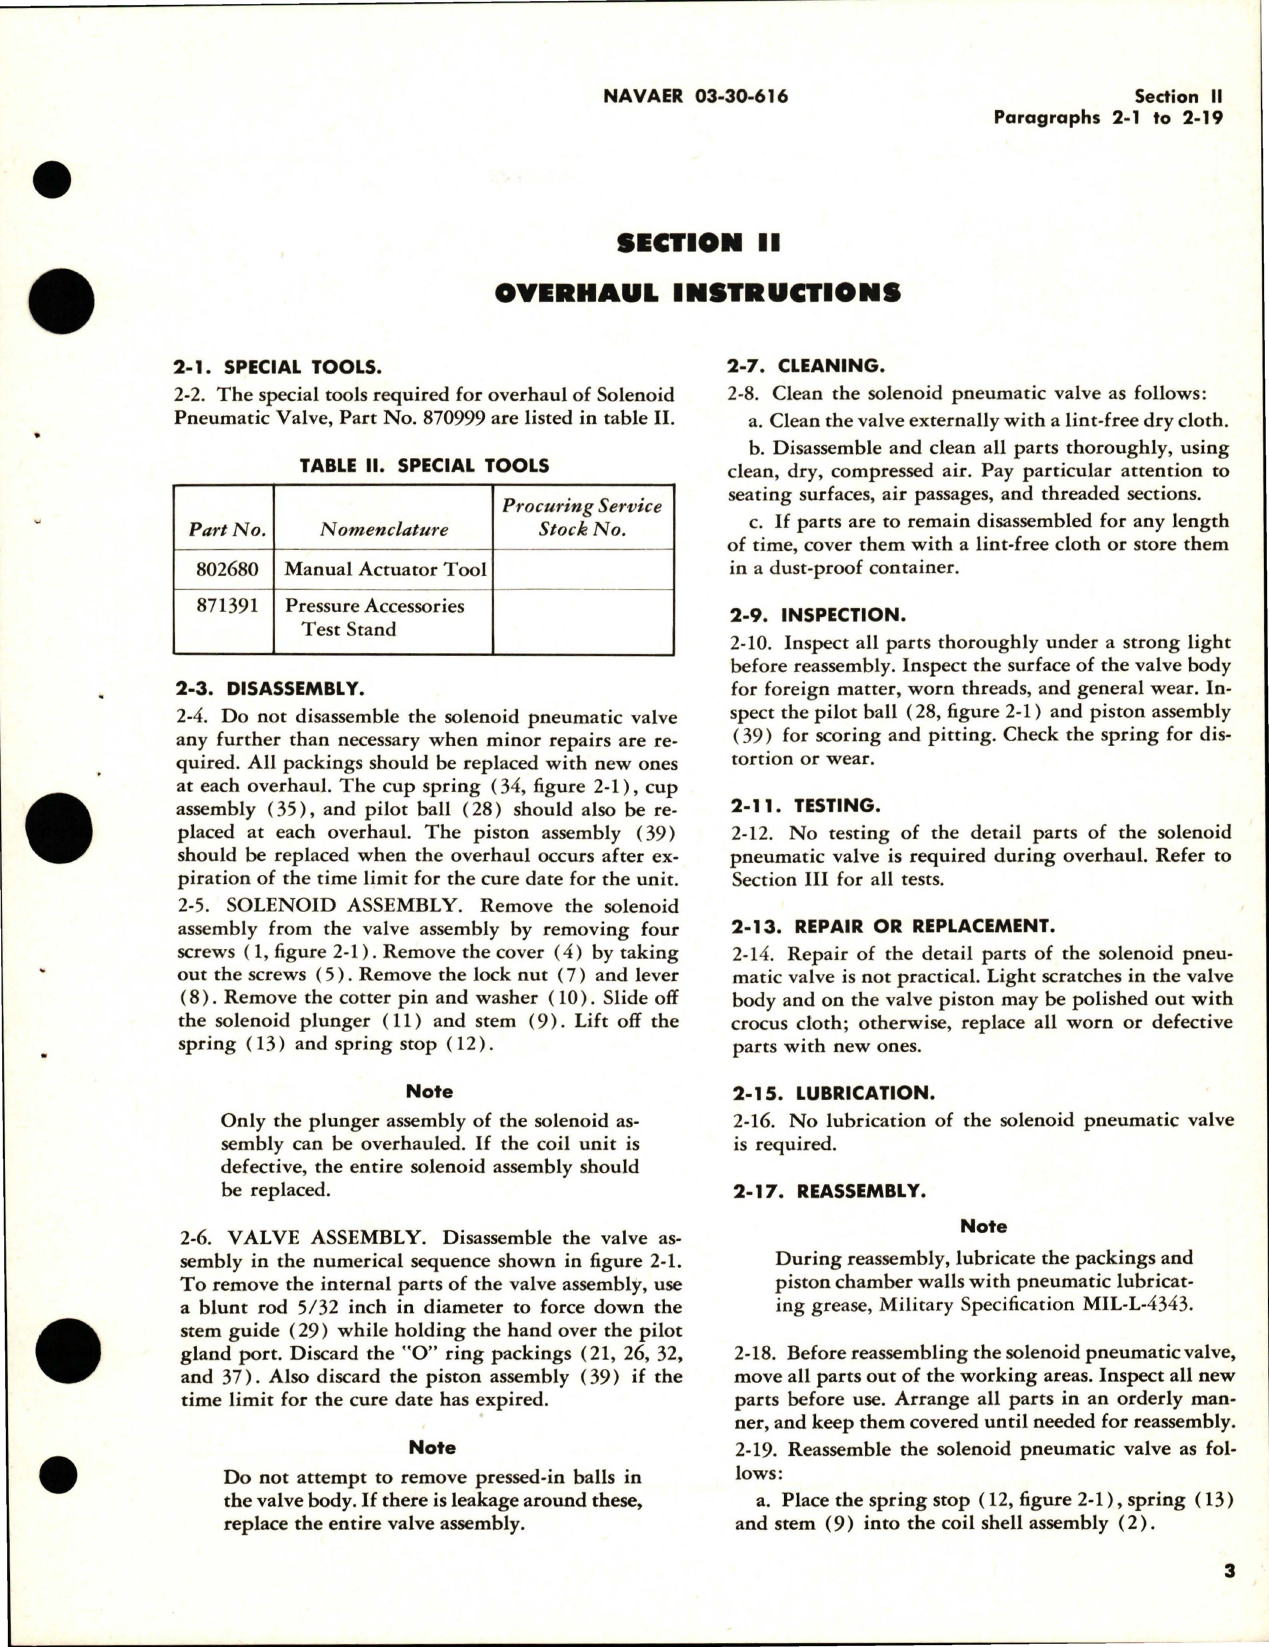 Sample page 7 from AirCorps Library document: Overhaul Instructions for Solenoid Pneumatic Valves